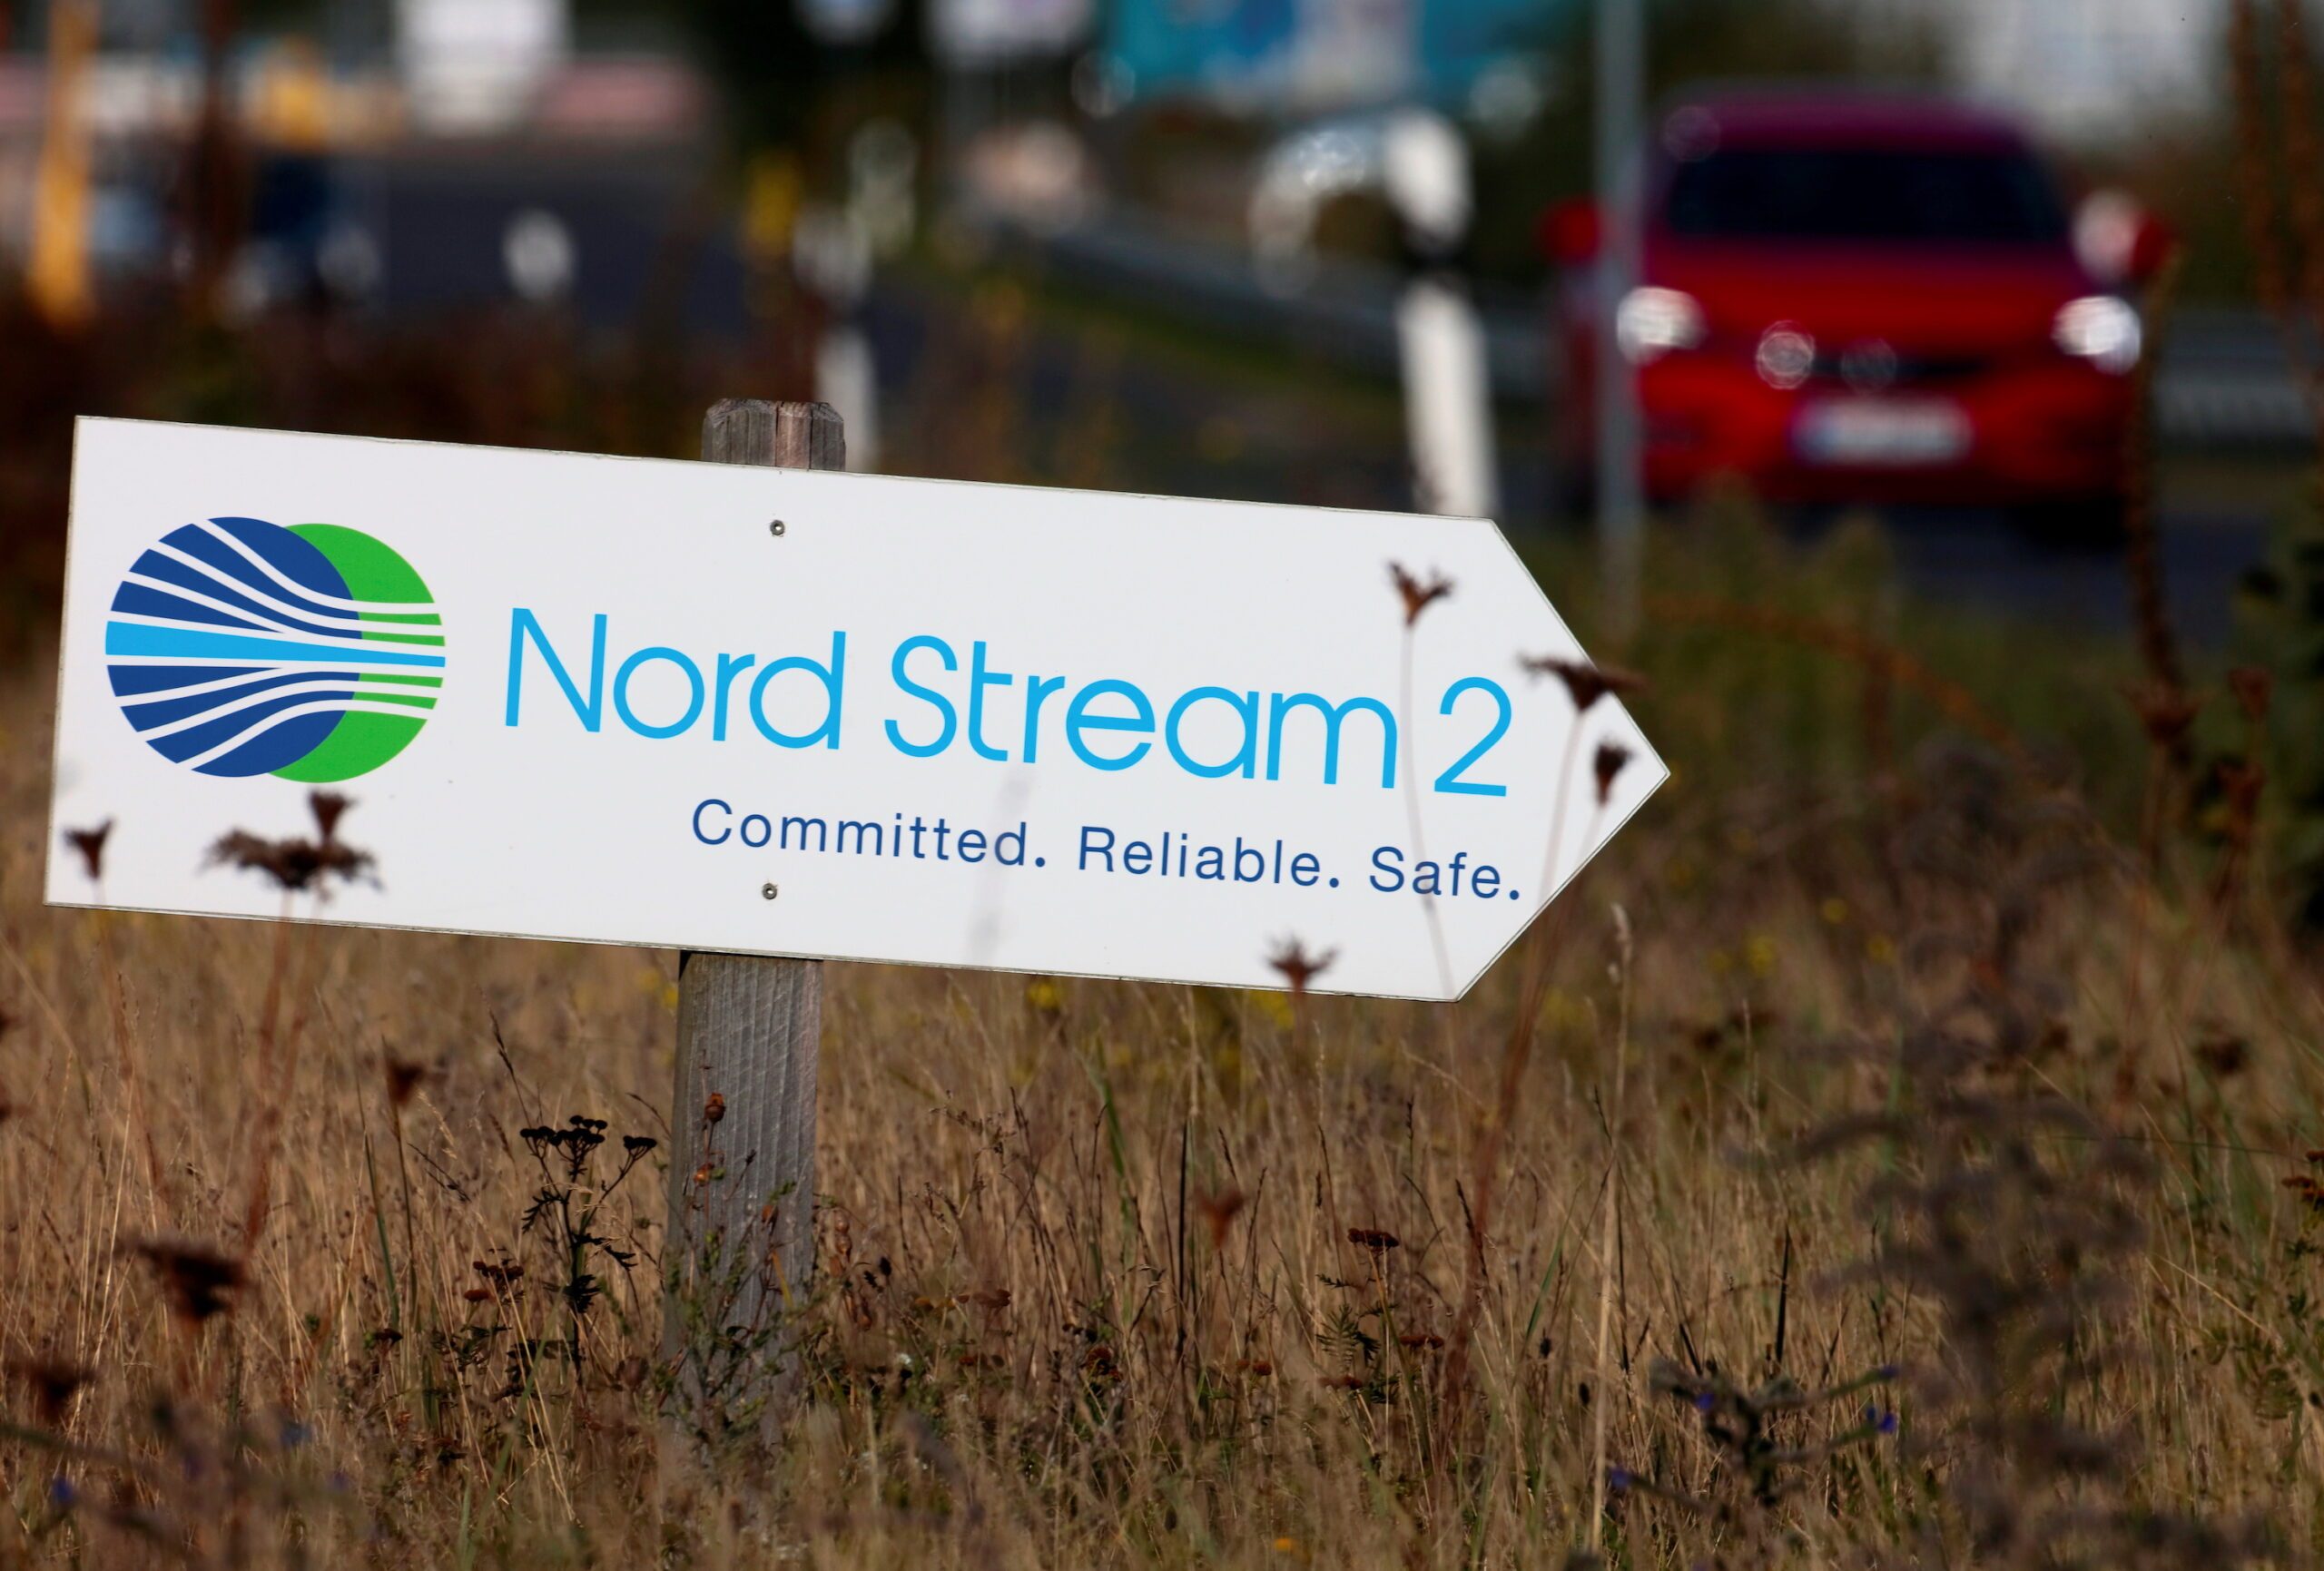 European insurers fear sanctions coming down Nord Stream 2 pipe